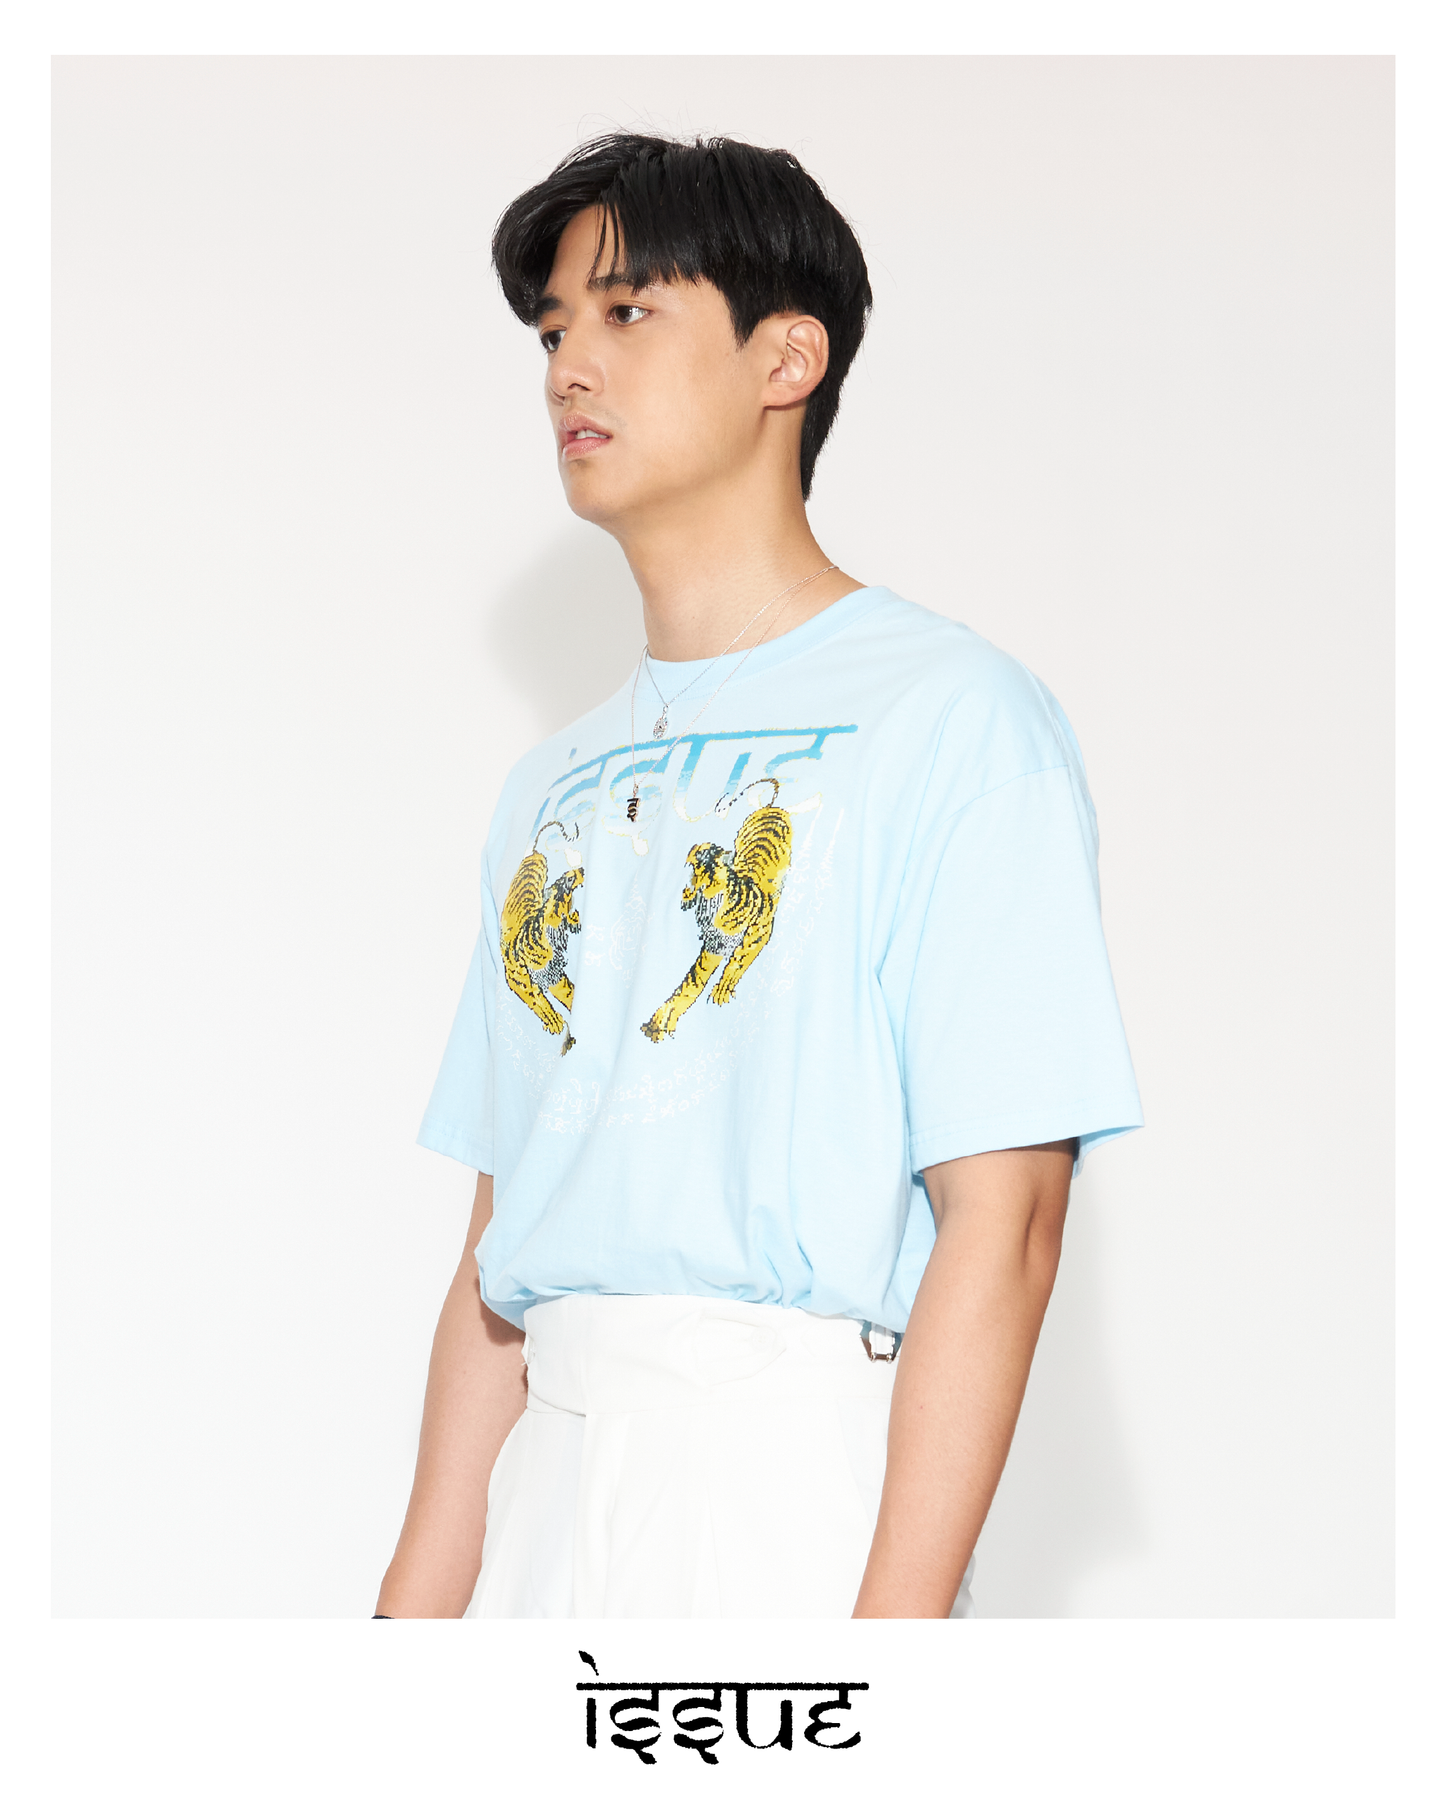 ISSUE - T-shirt SS22-Oversize-BL